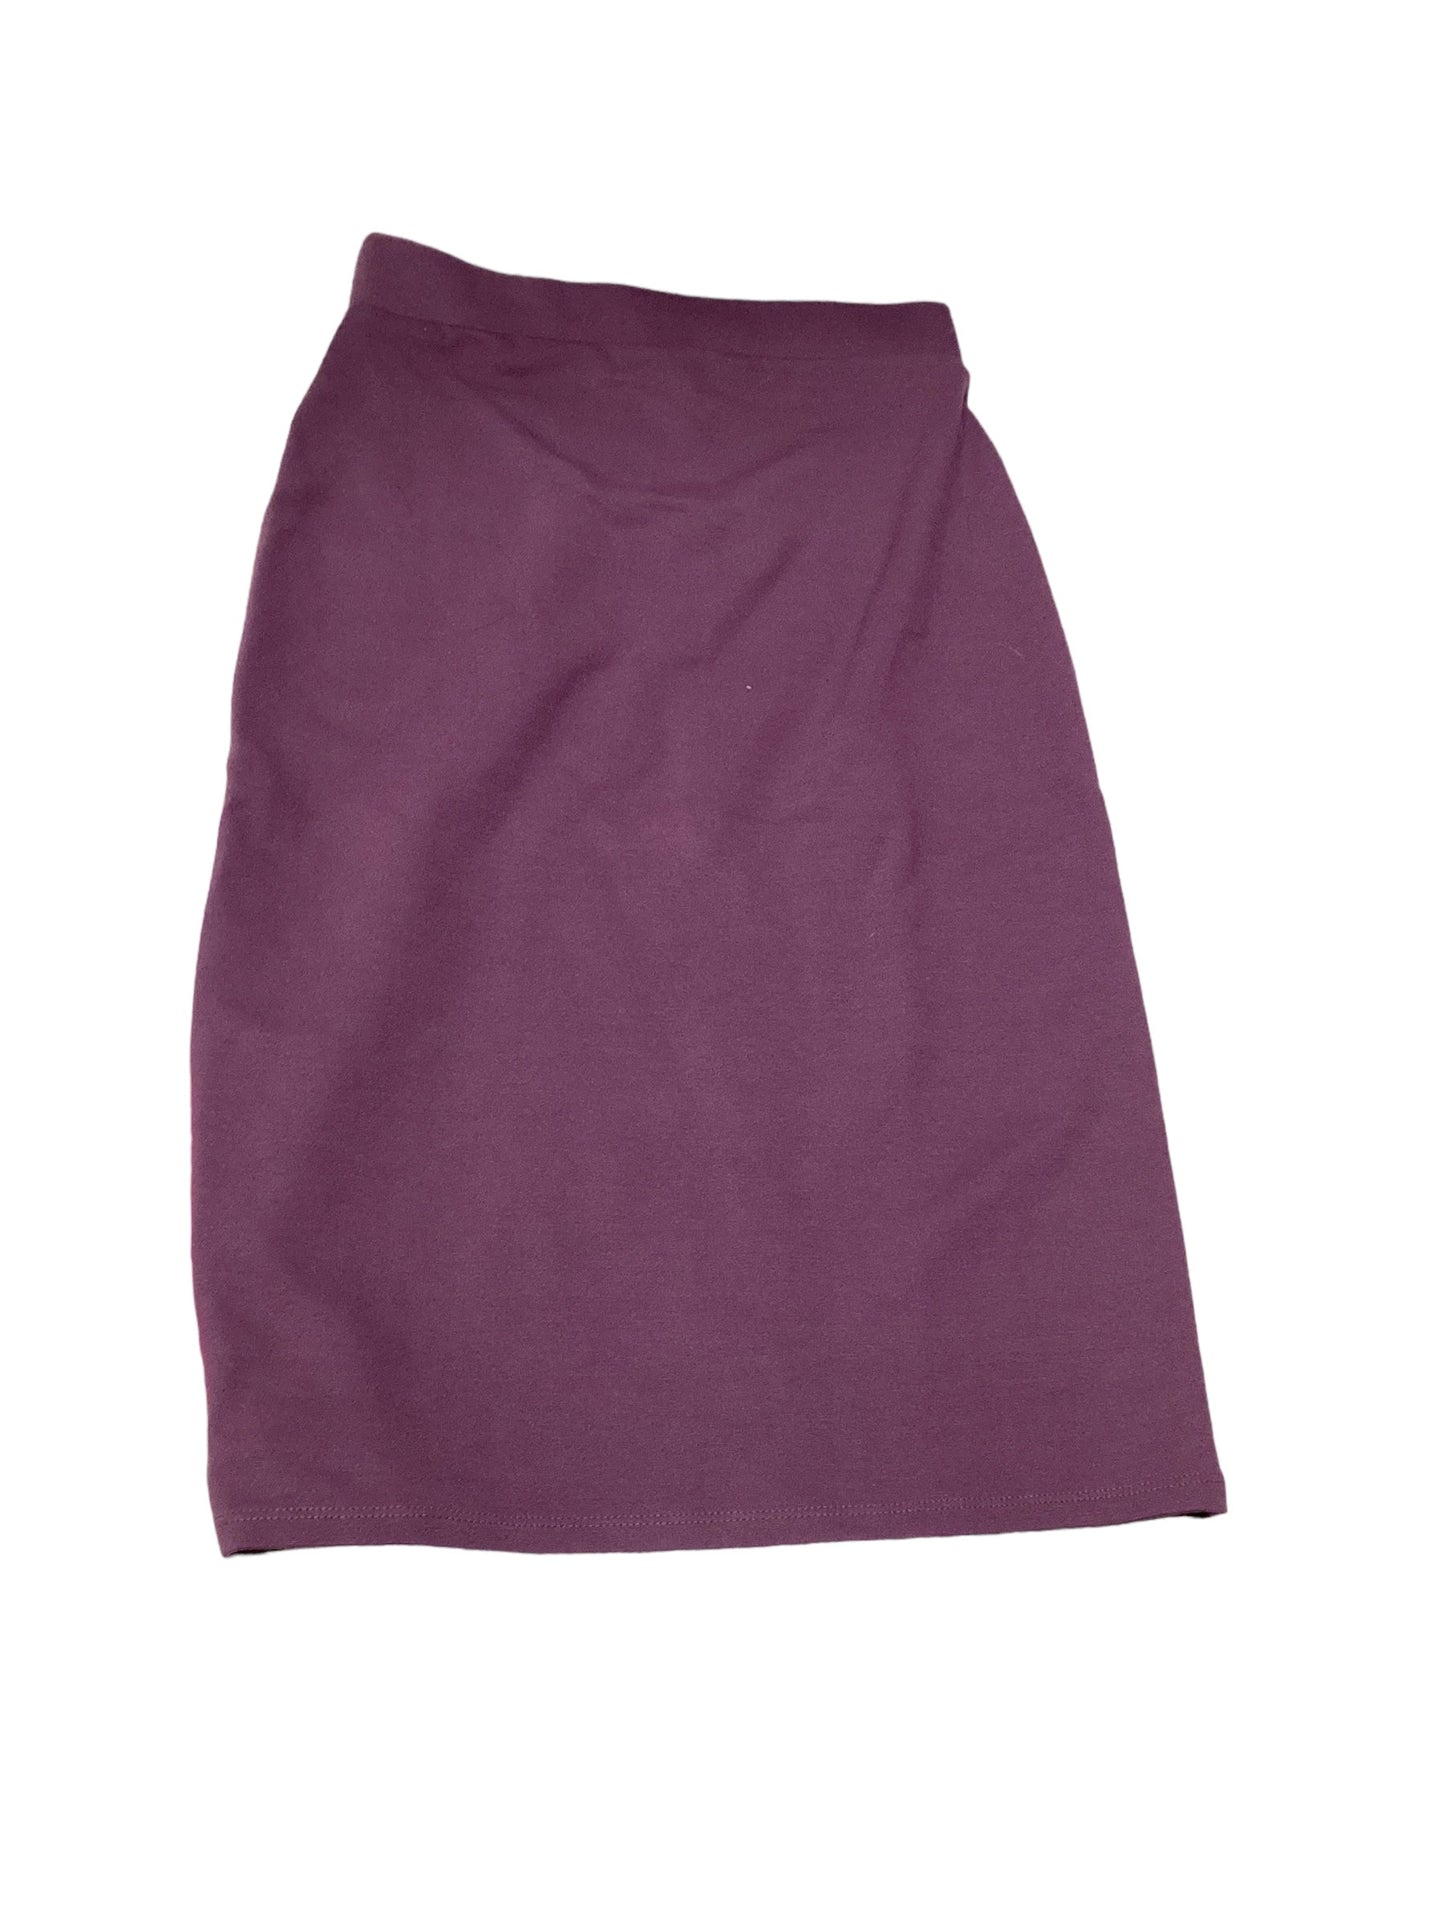 Skirt Midi By Zenana Outfitters  Size: S